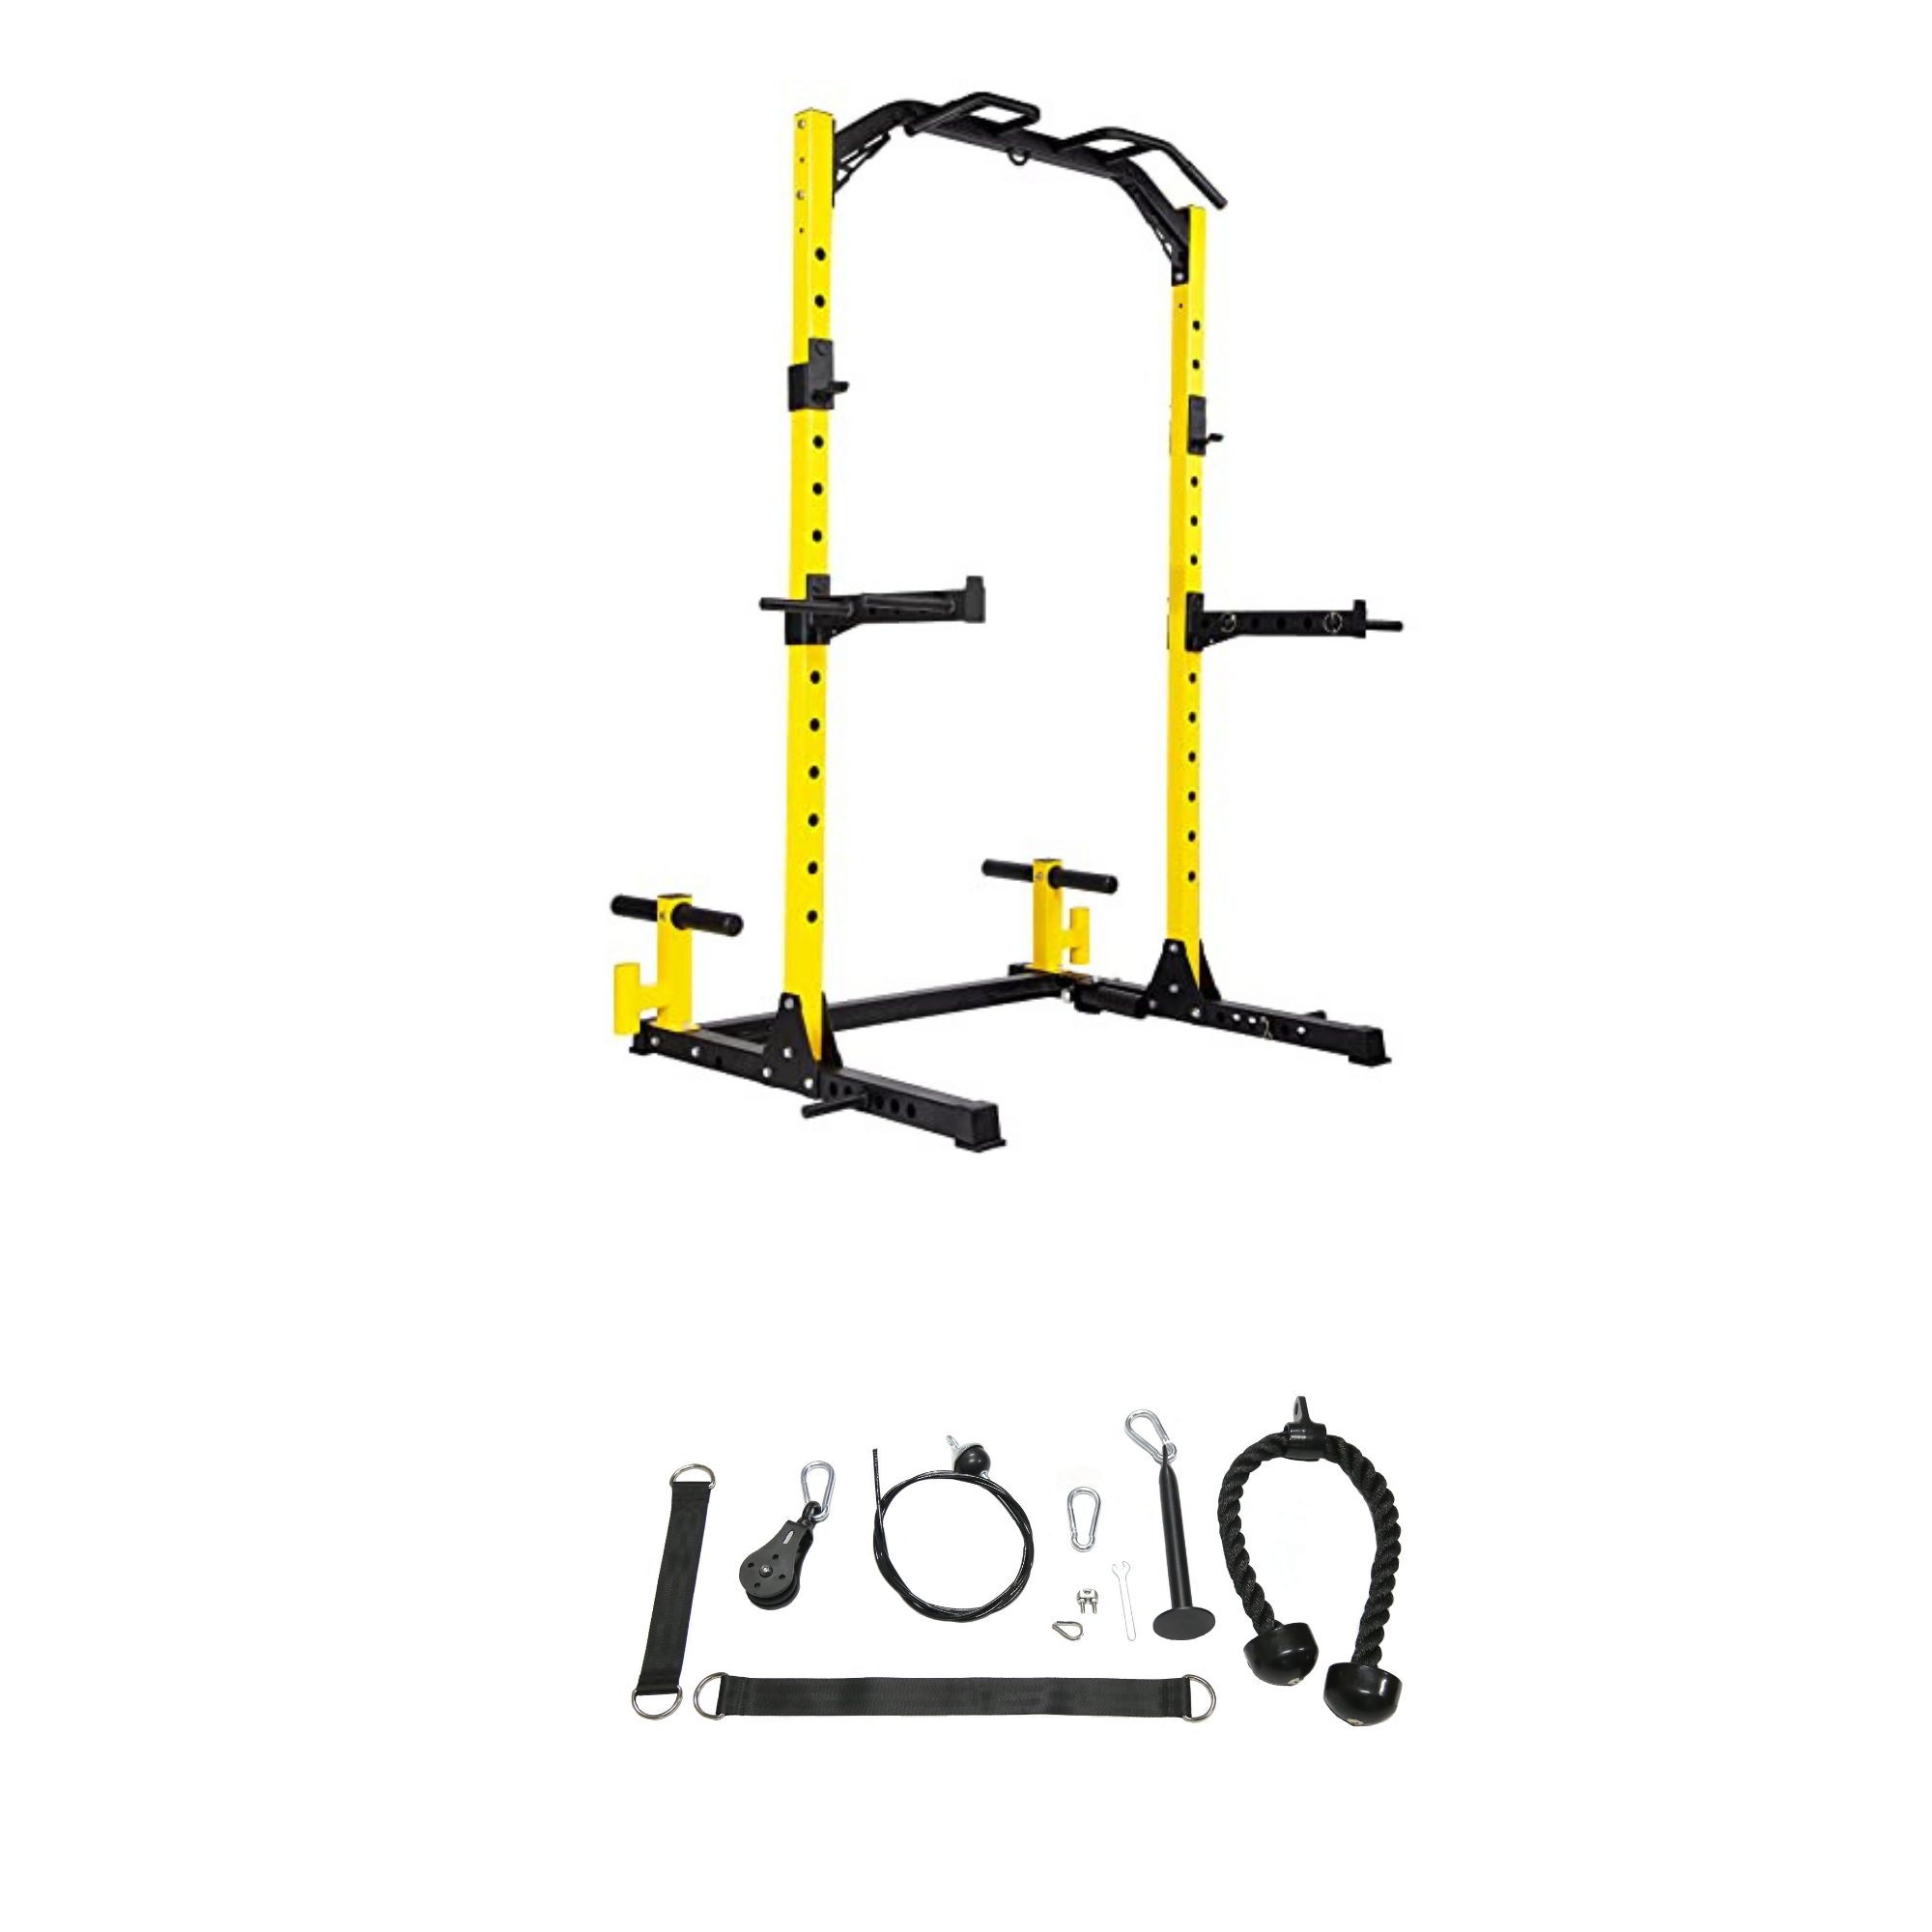 Starter Bundle : Squat Stand with Cable Pulley System